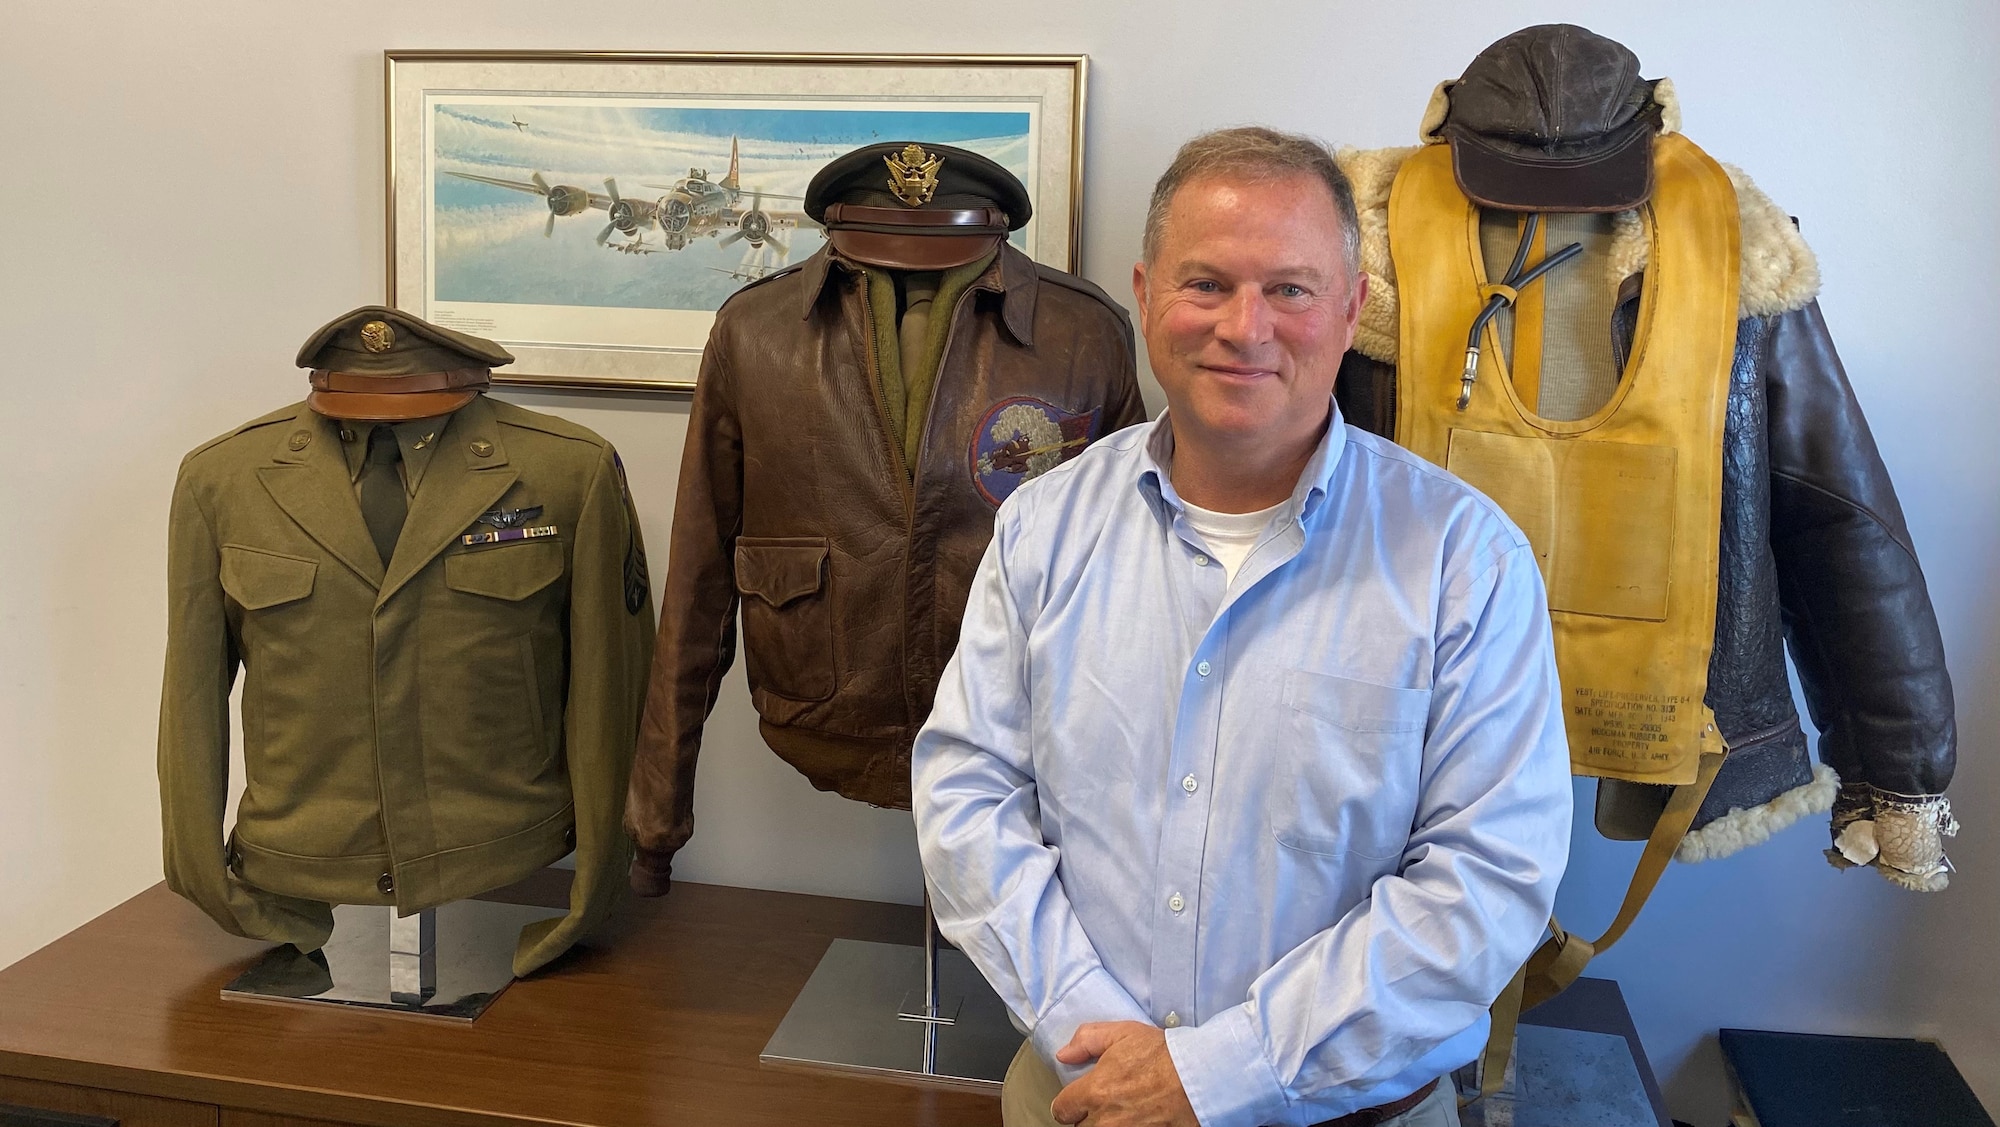 Alan Brady standing in front of three busts adorned with vintage pilot uniforms dating back to World War II.